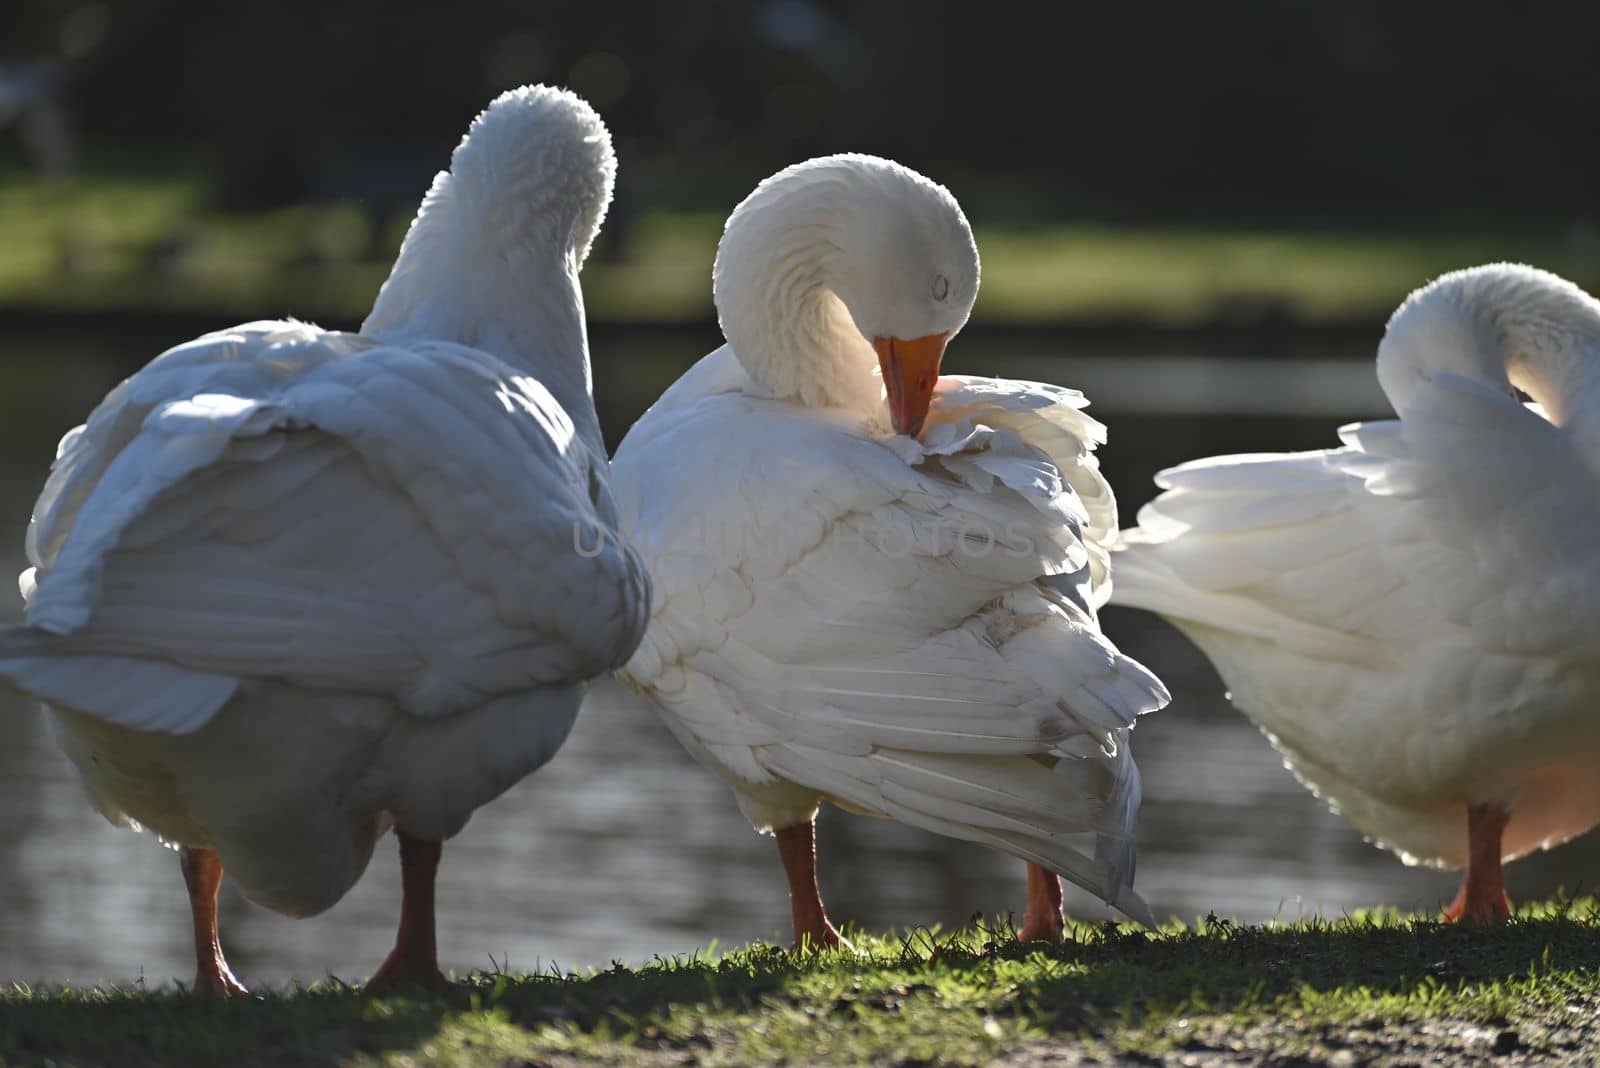 White geese grooming their feathers in the park by Luise123